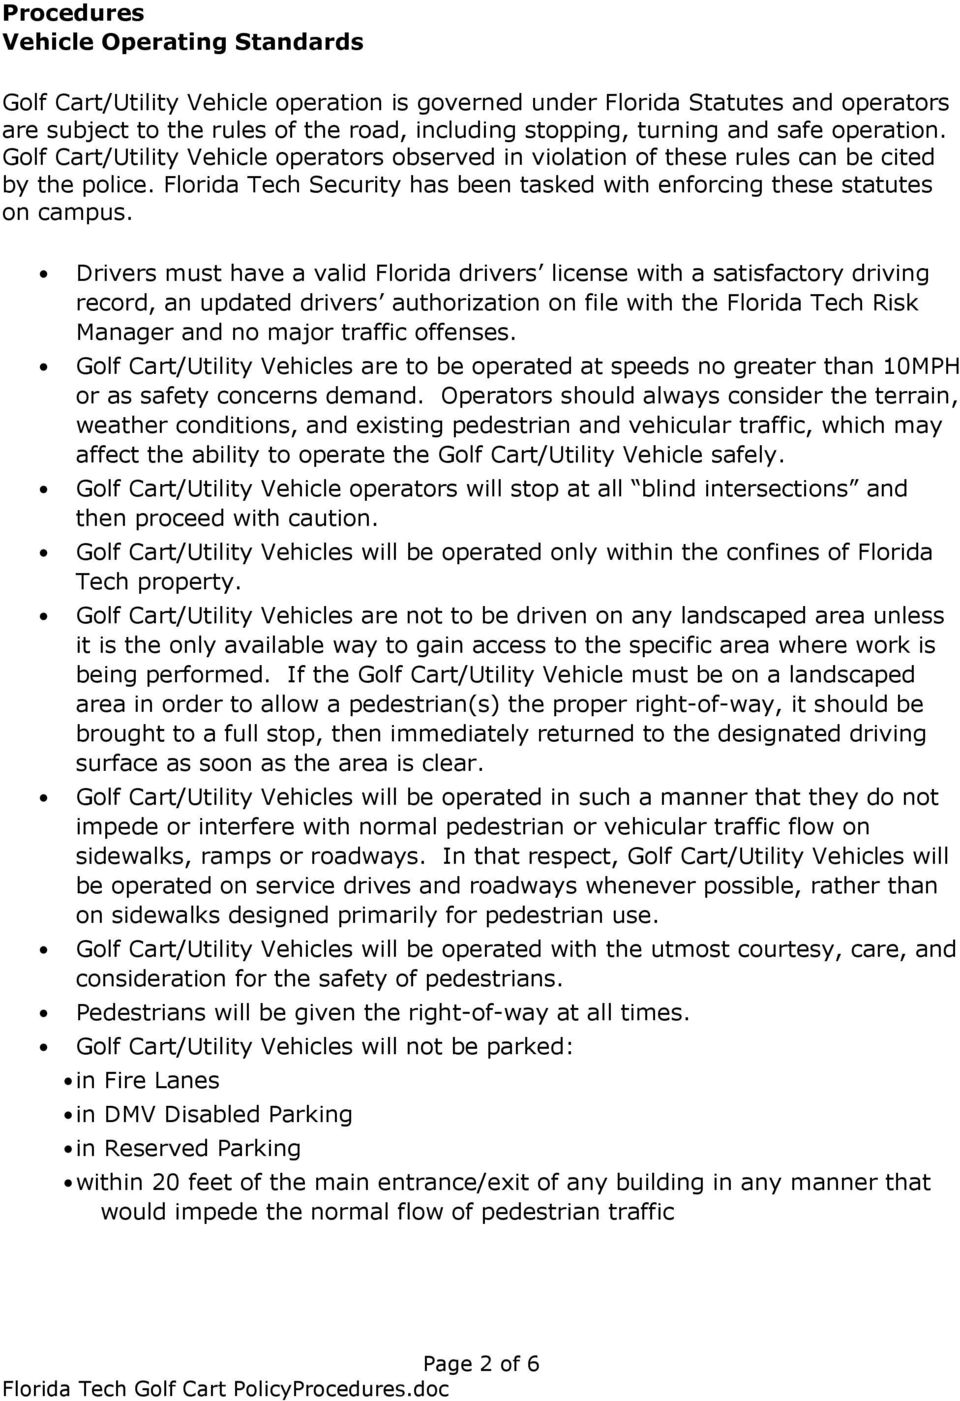 Drivers must have a valid Florida drivers license with a satisfactory driving record, an updated drivers authorization on file with the Florida Tech Risk Manager and no major traffic offenses.